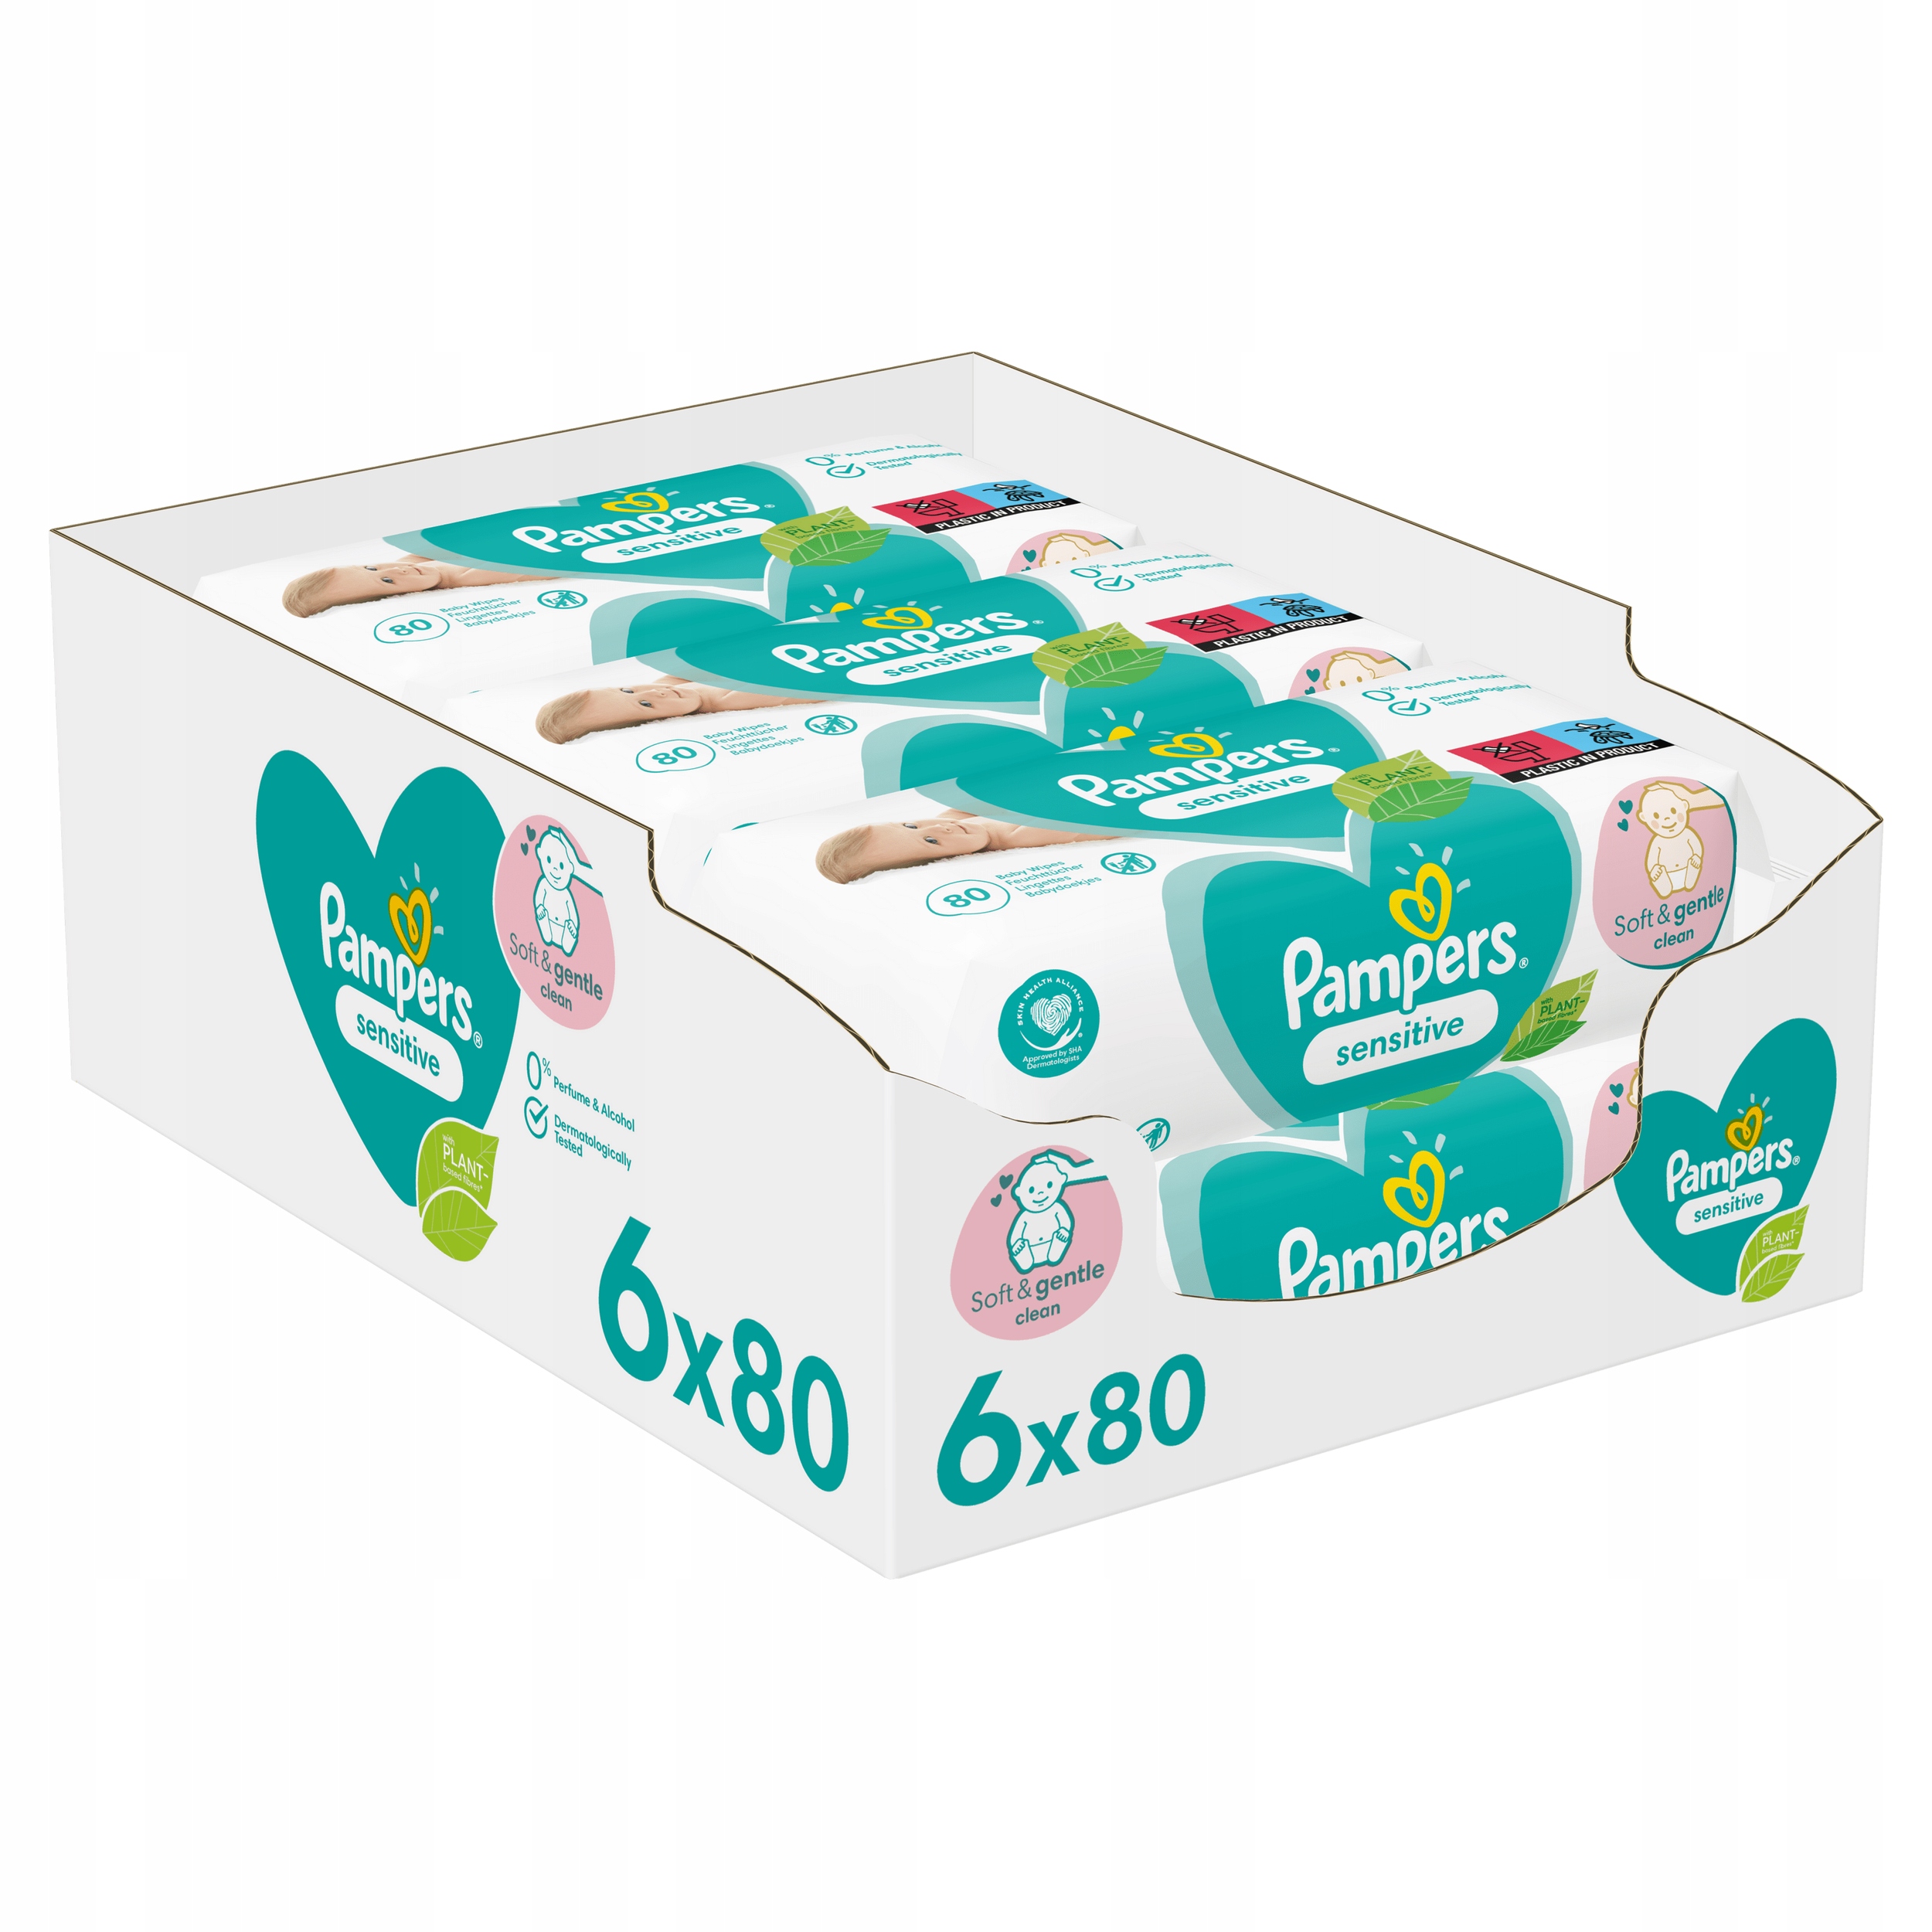 giant box 144 pampers 2